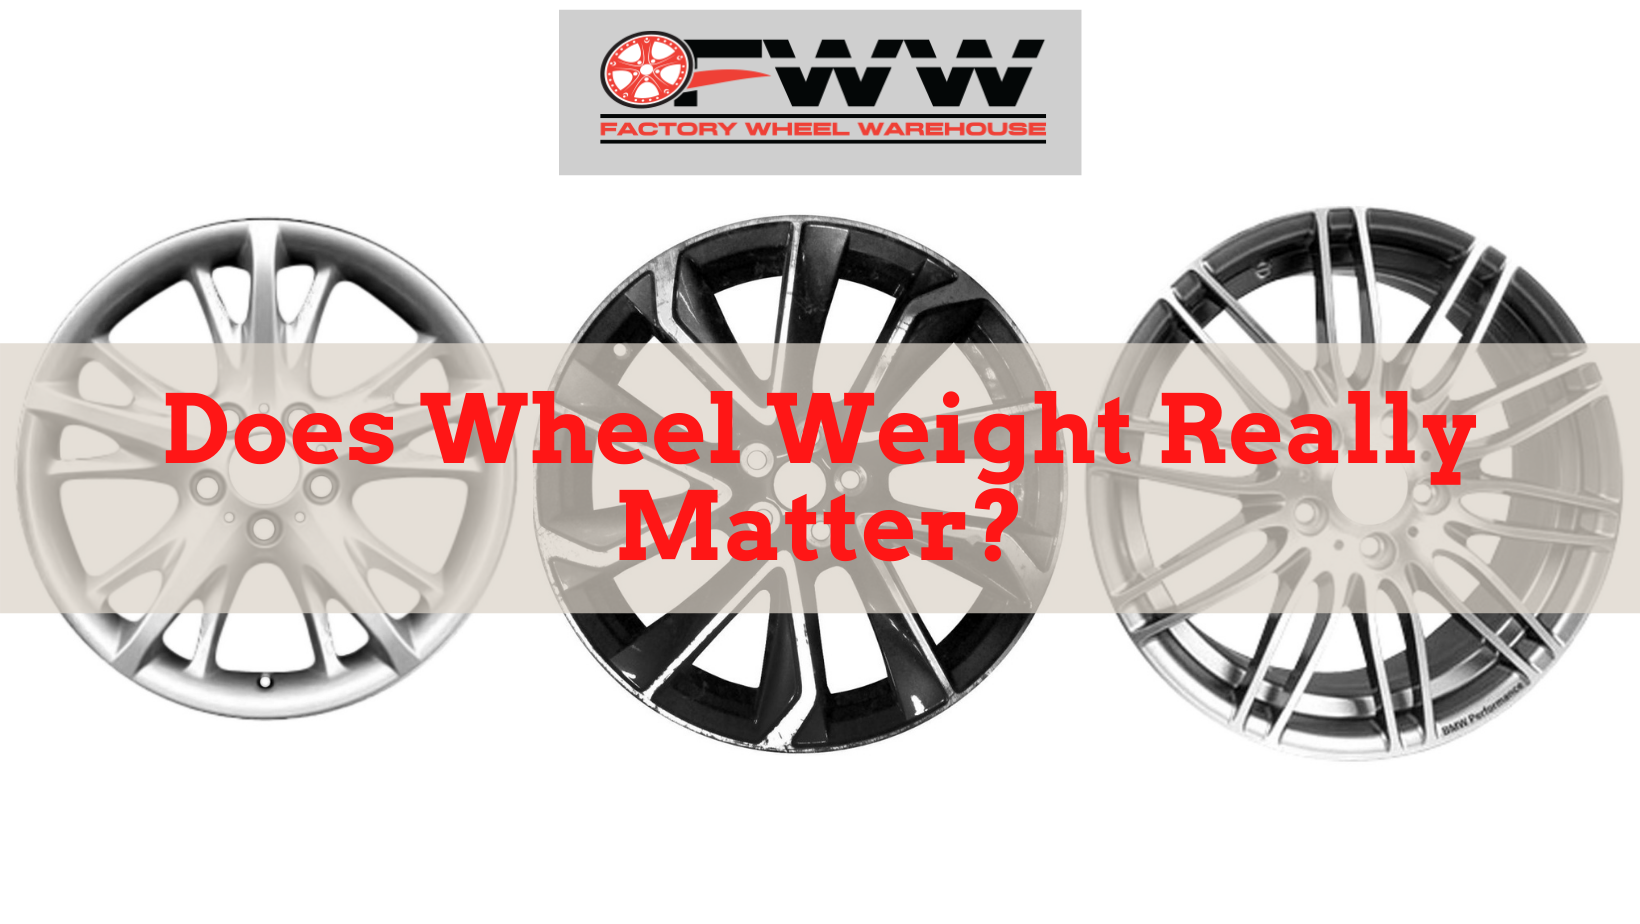 Does Wheel Weight really matter?